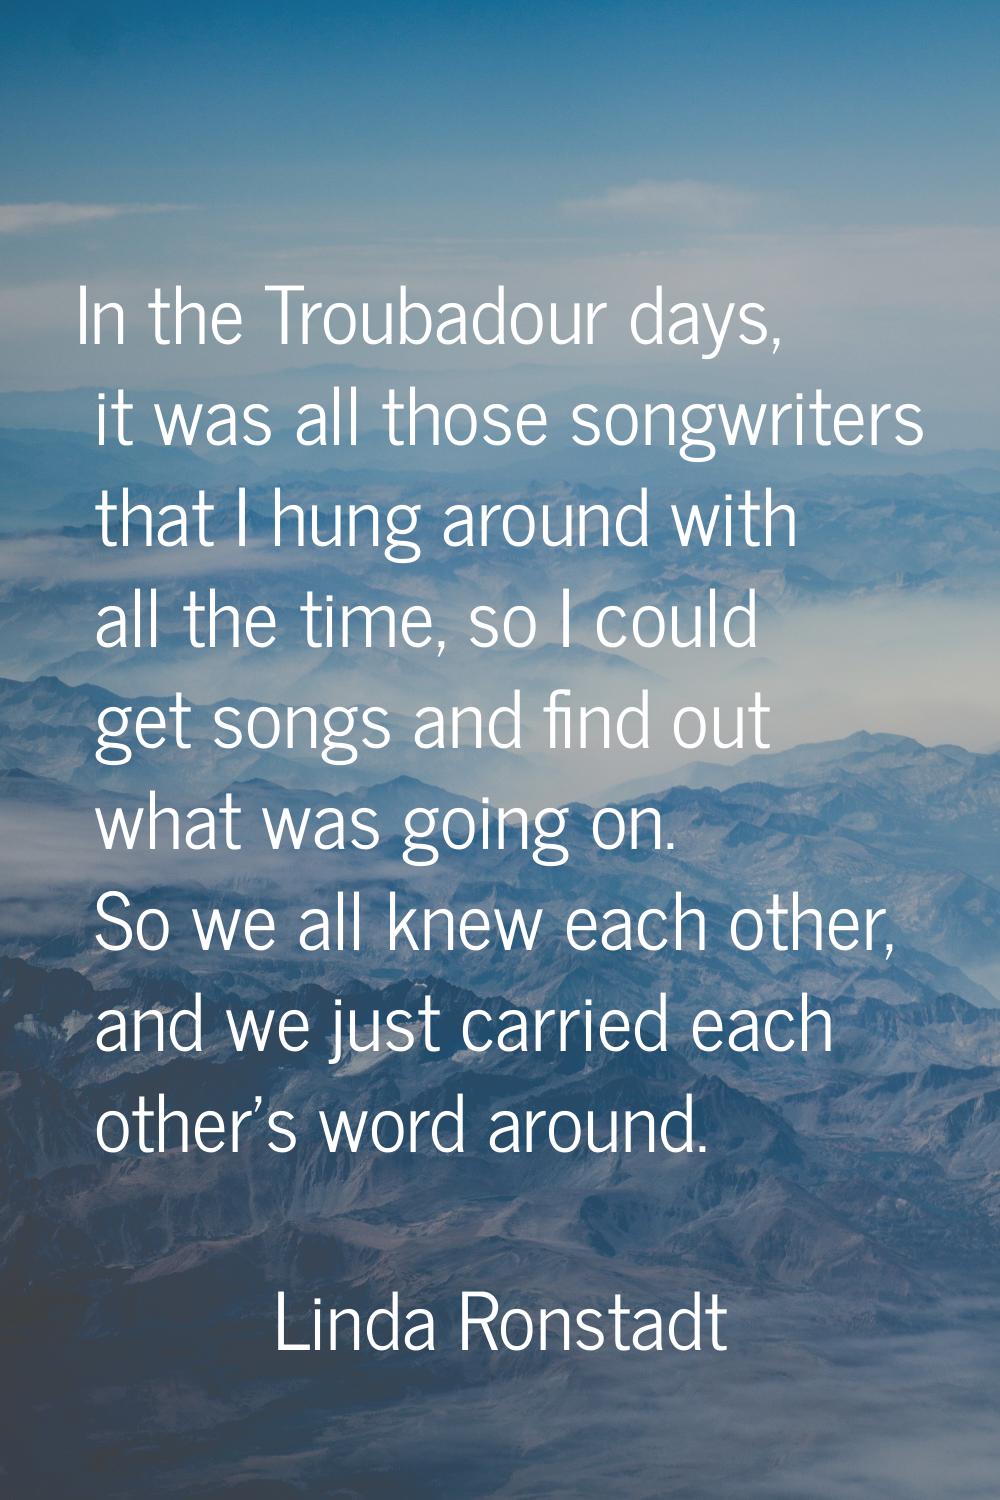 In the Troubadour days, it was all those songwriters that I hung around with all the time, so I cou